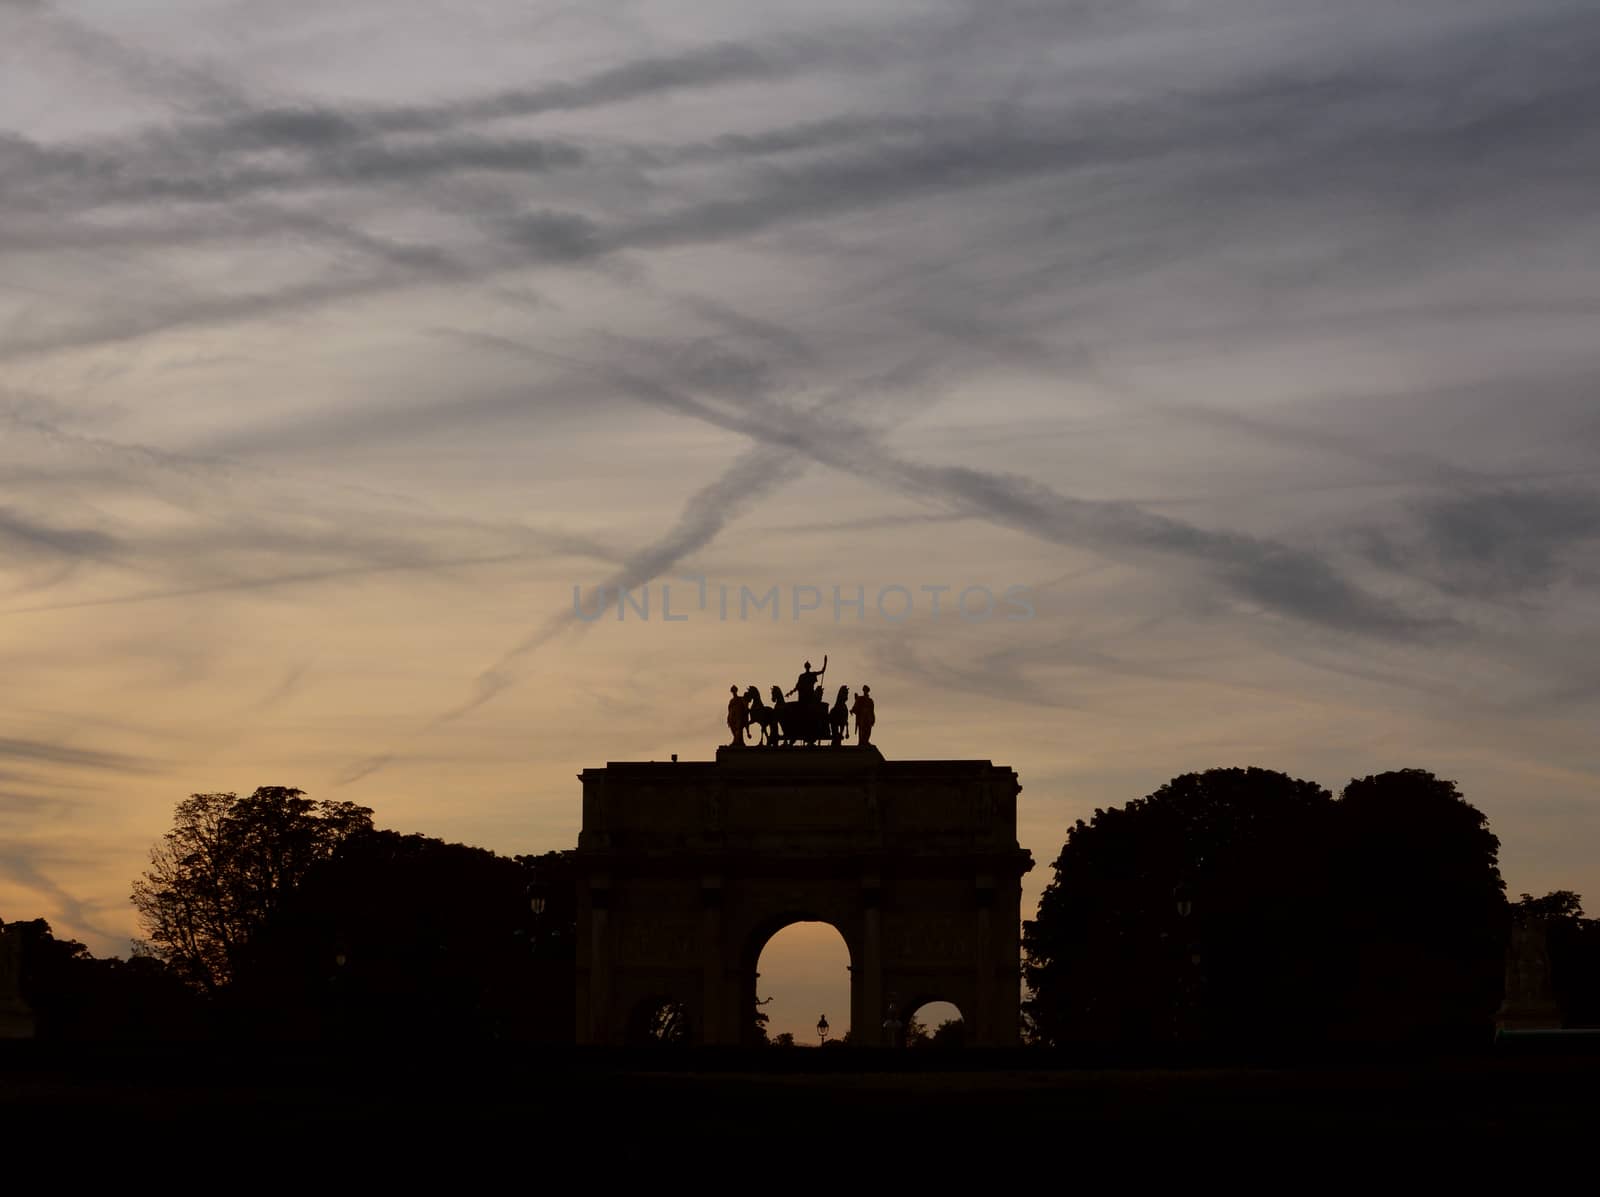 Arc de Triomphe du Carrousel near the Louvre in Paris in silhouette against a twilight sky covered in contrails